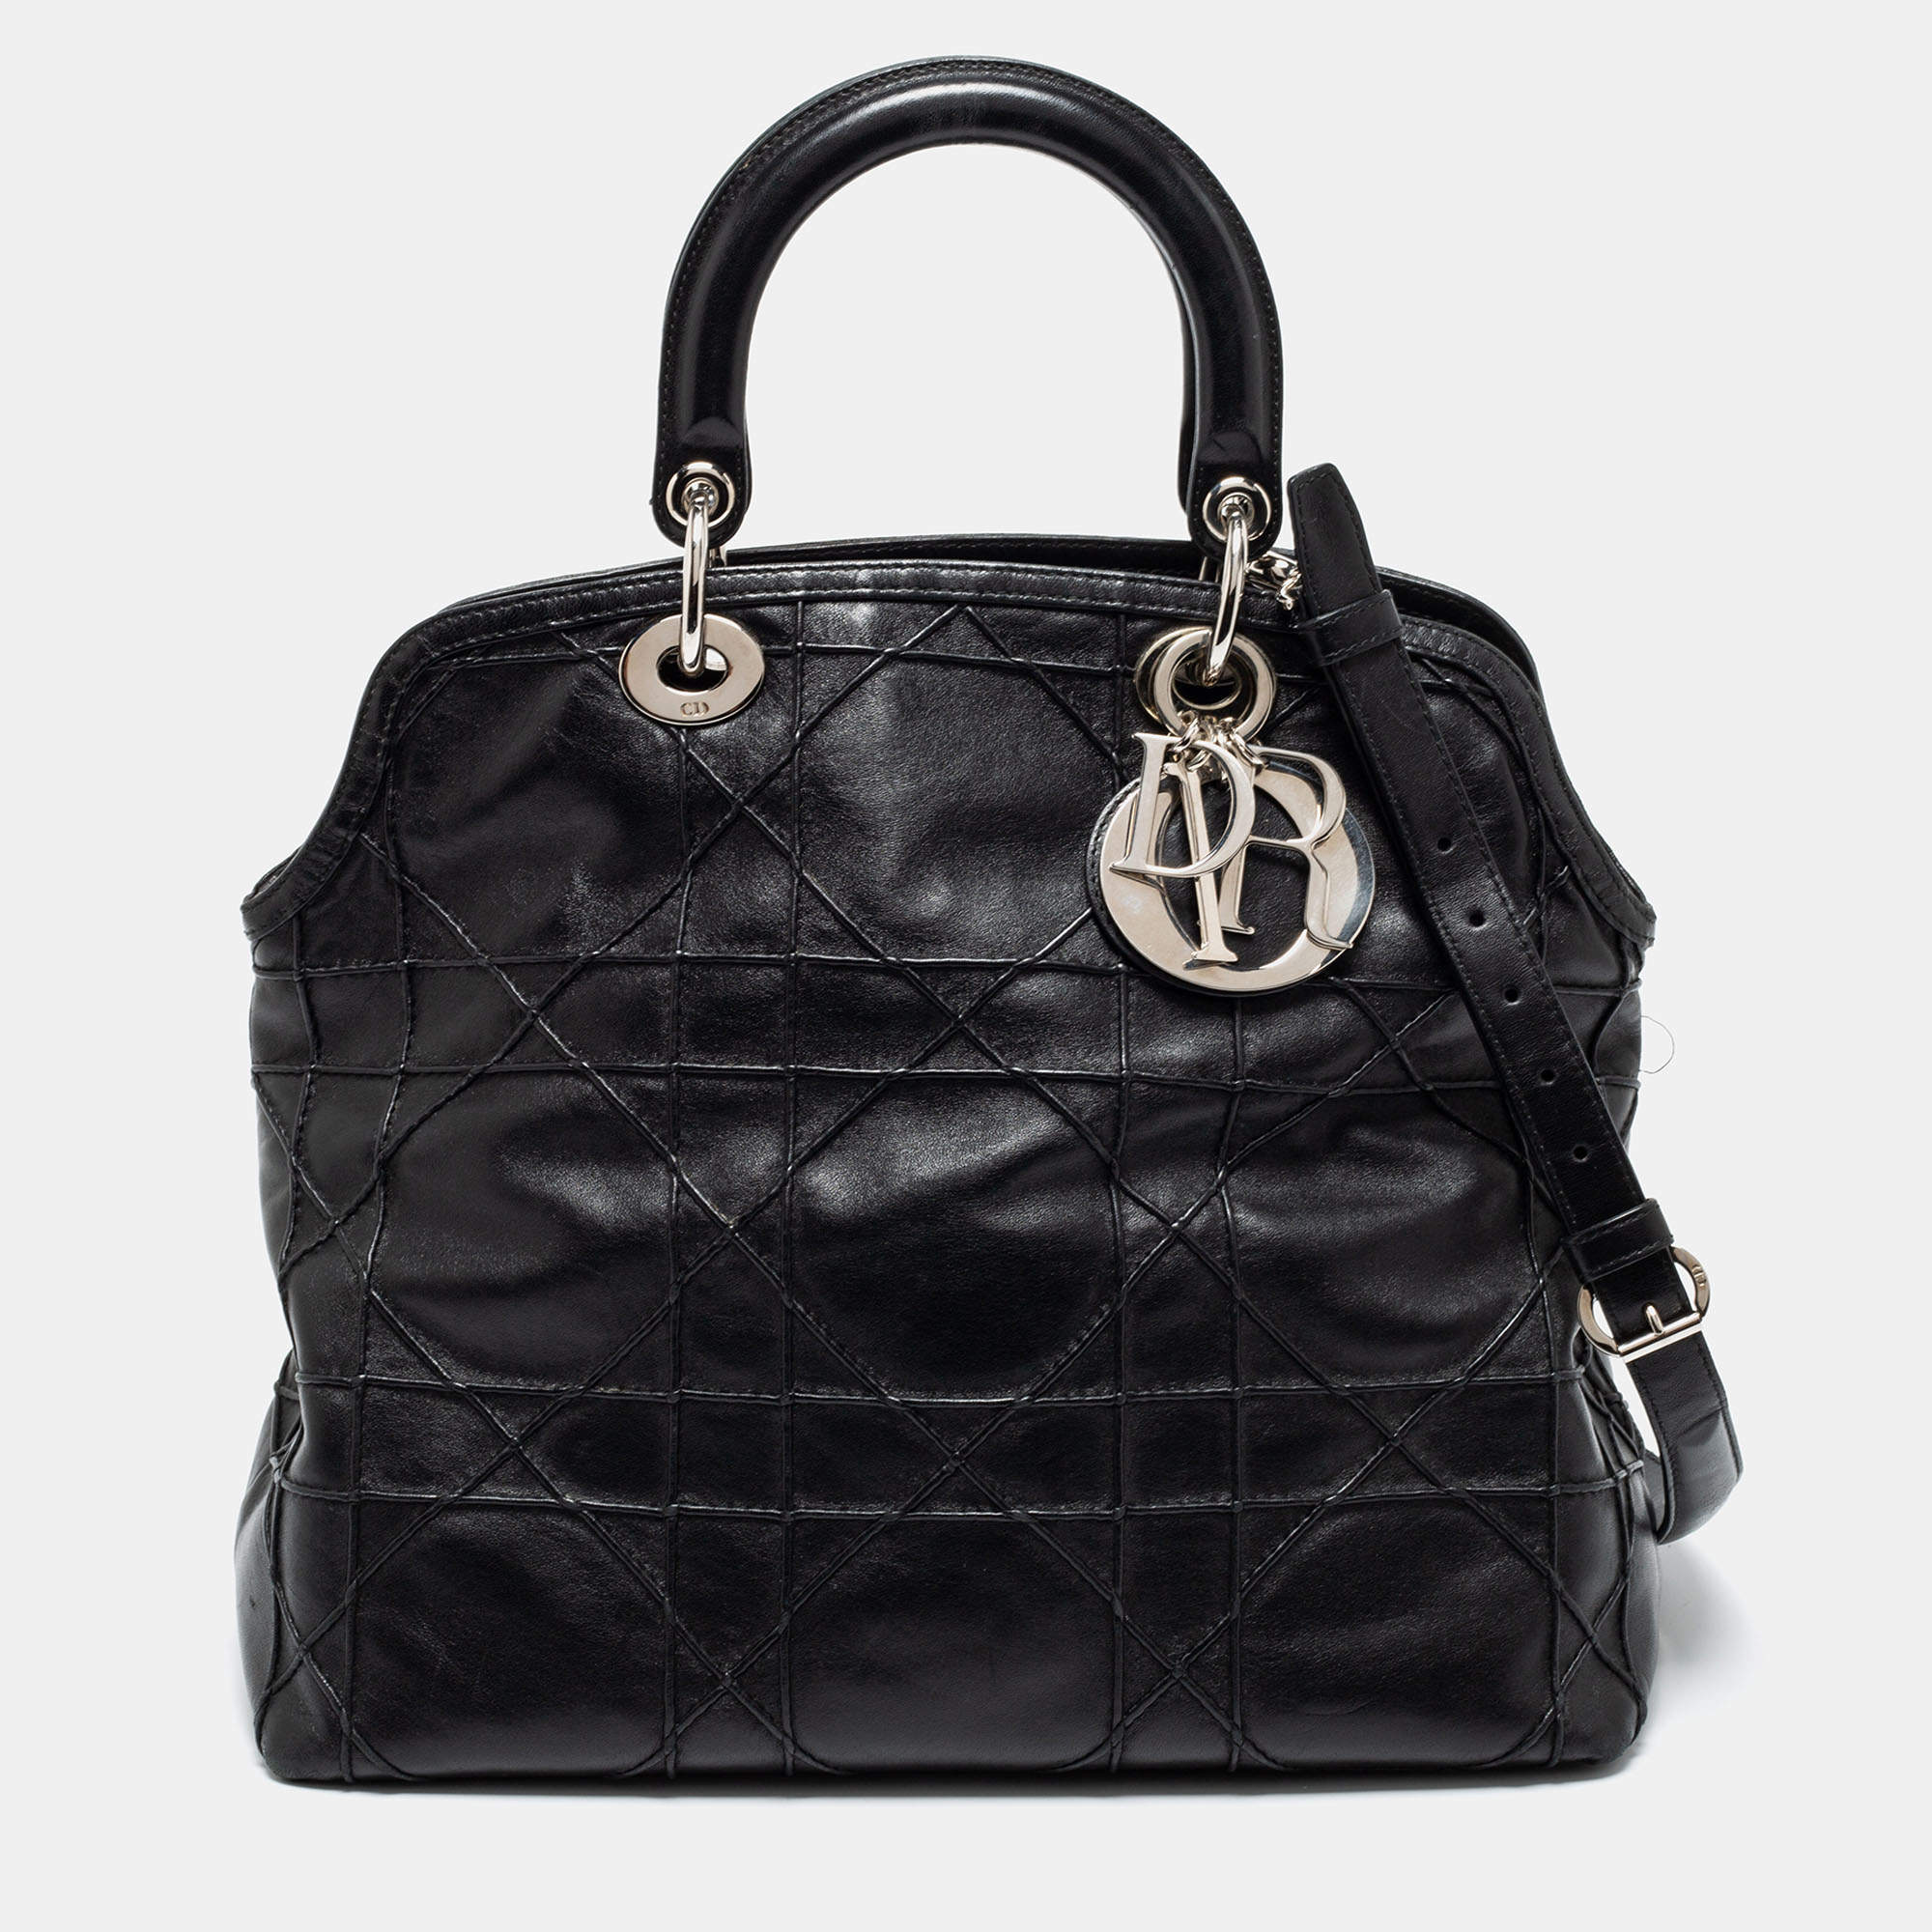 Dior Black Quilted Leather Granville Tote